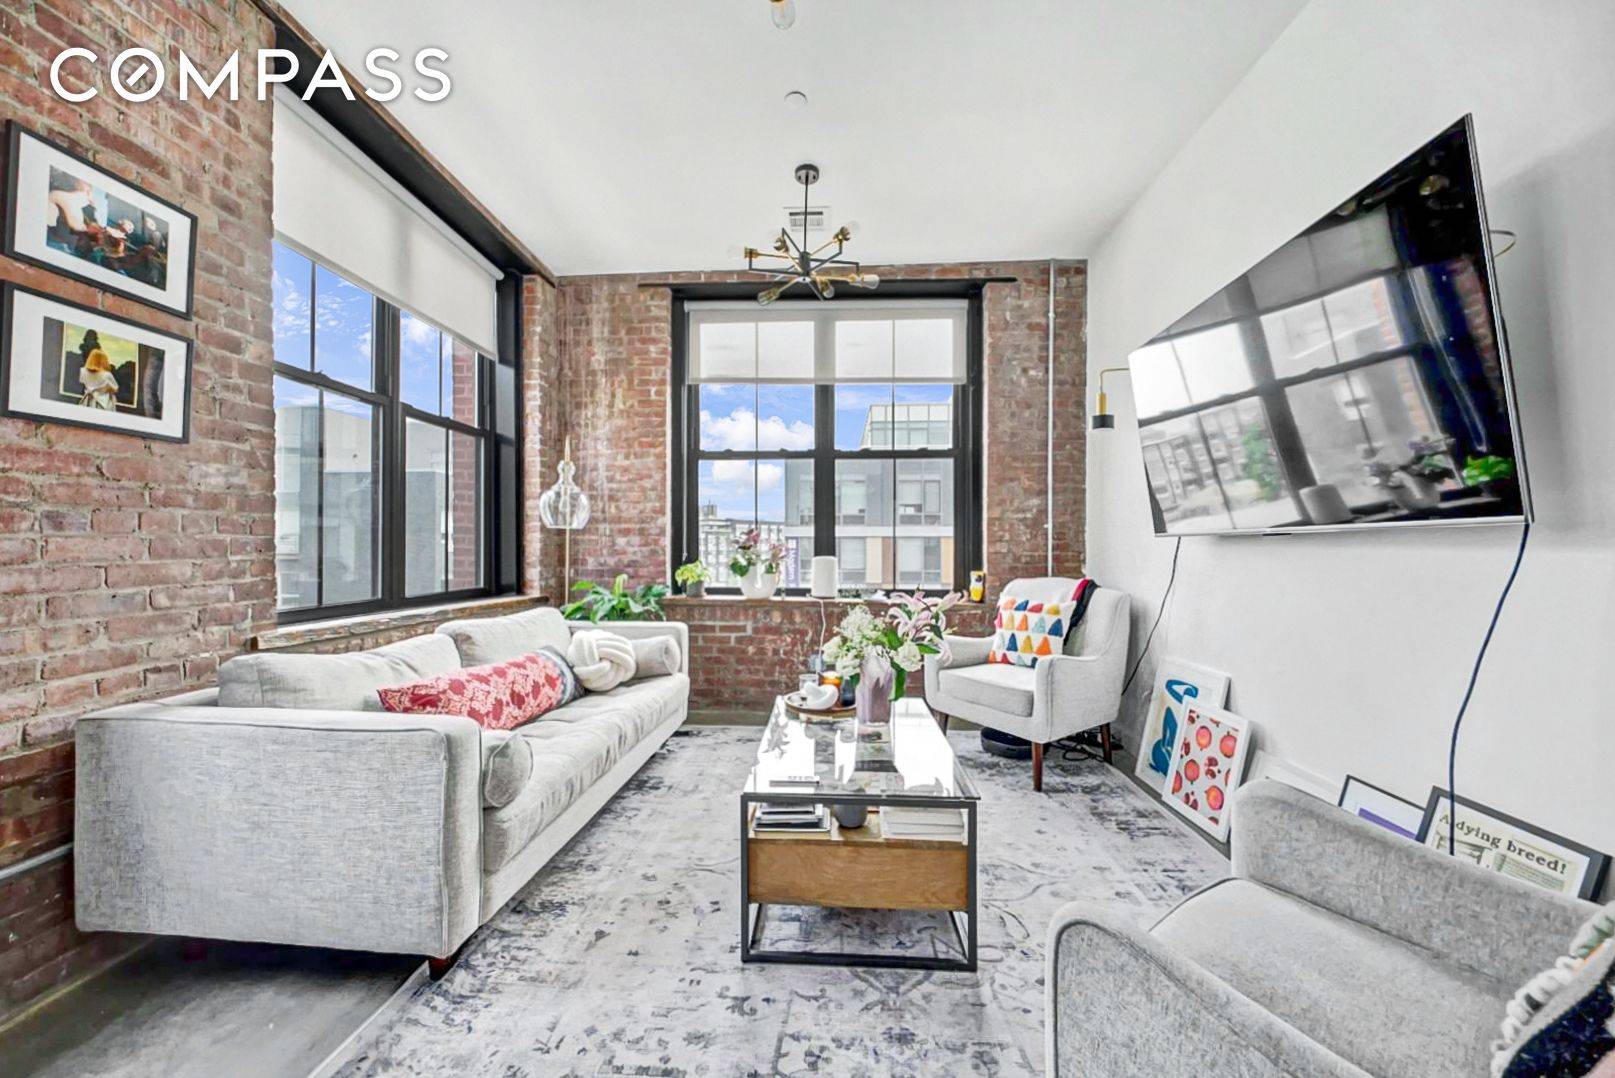 Outstanding corner loft with double exposure, walls of brick and large windows.